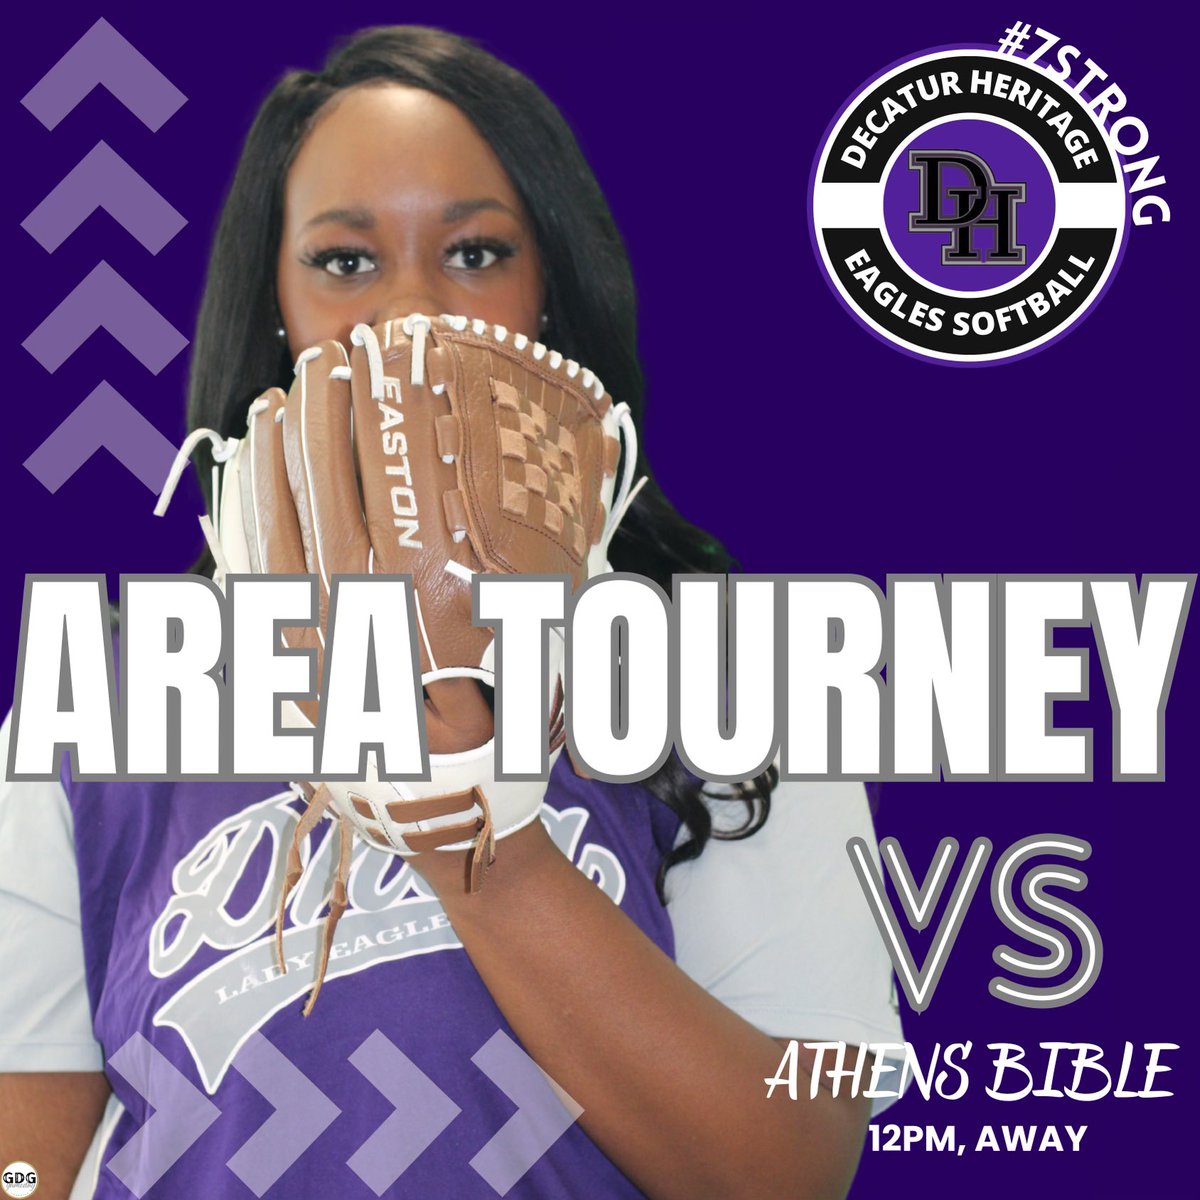 Come out and support your Lady Eagles 12pm @ Athens Bible! #7STRONG 💜🦅🥎